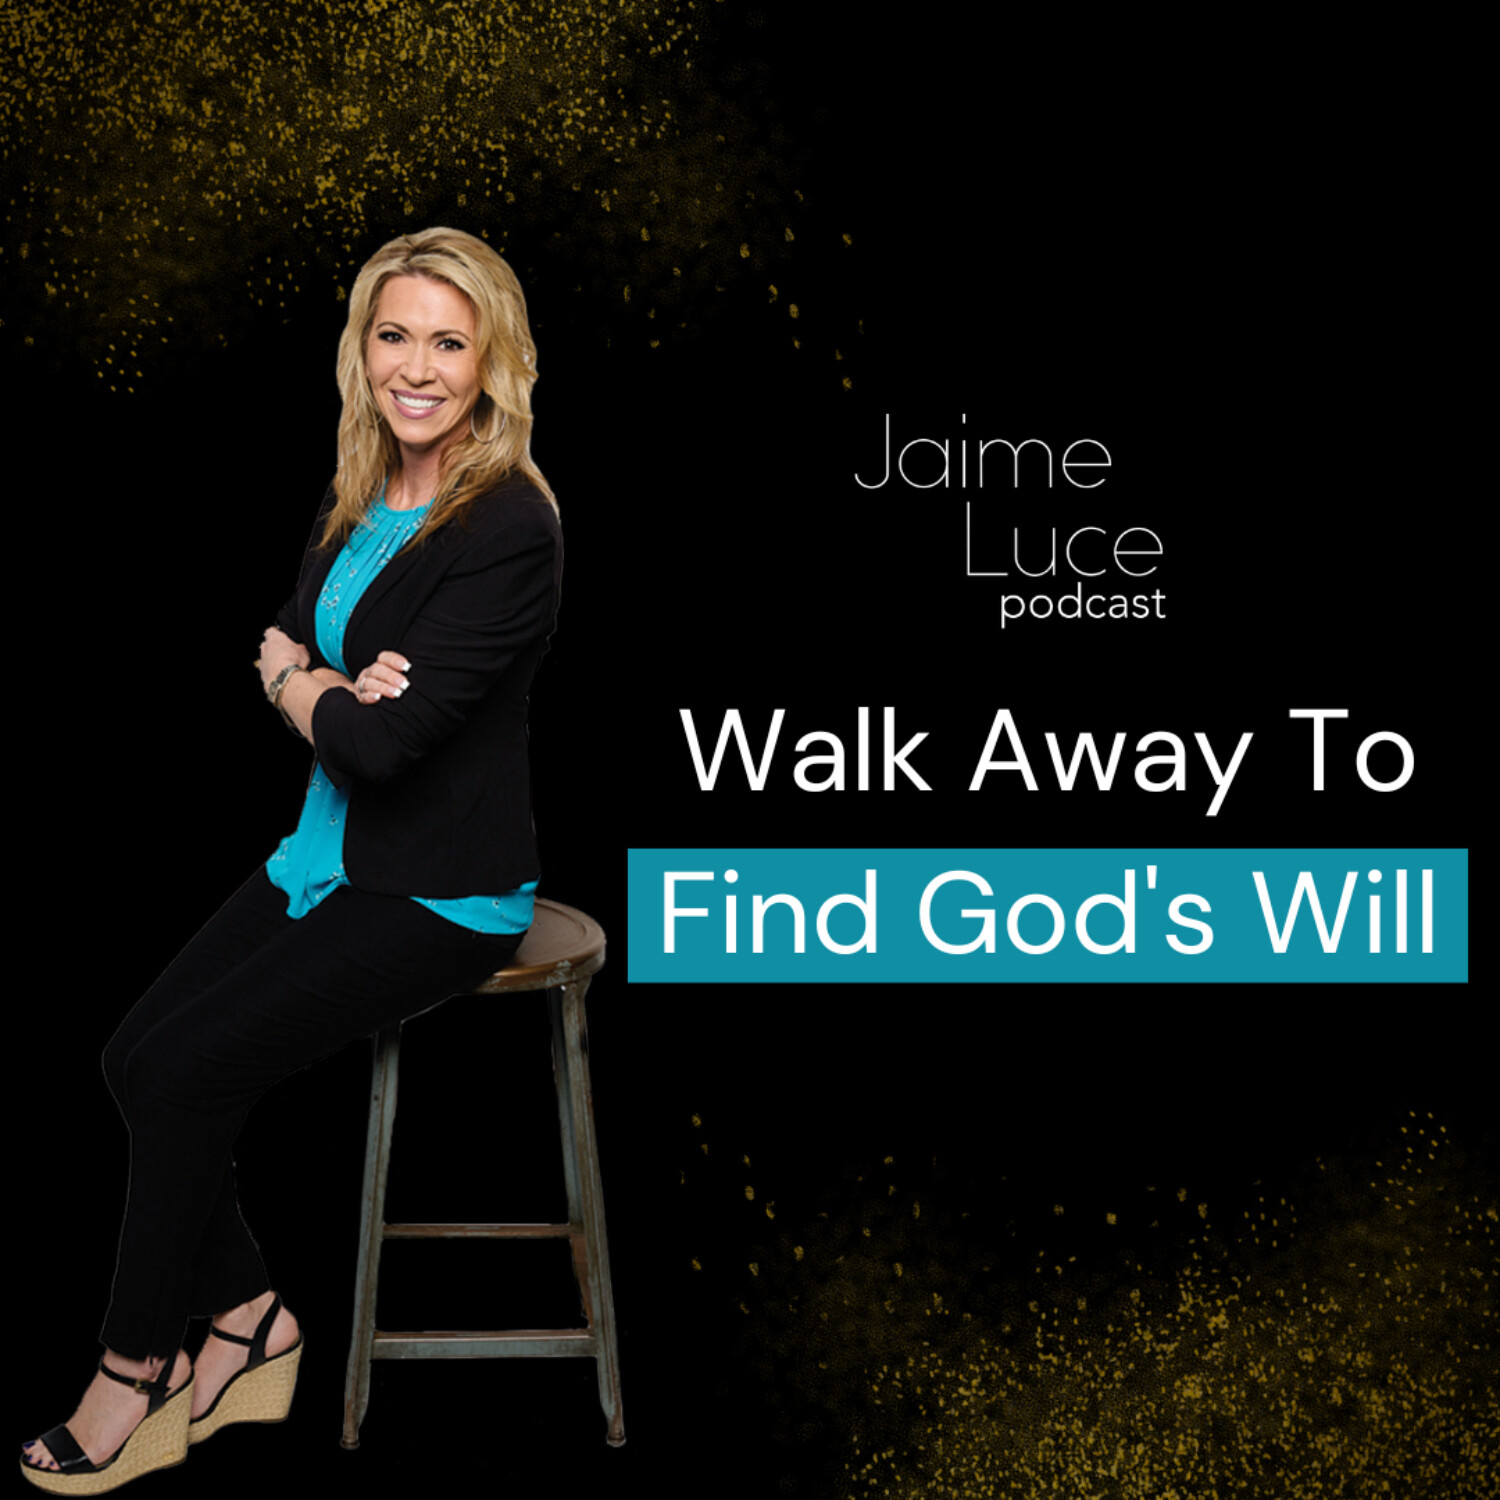 Walk Away To Find God's Will